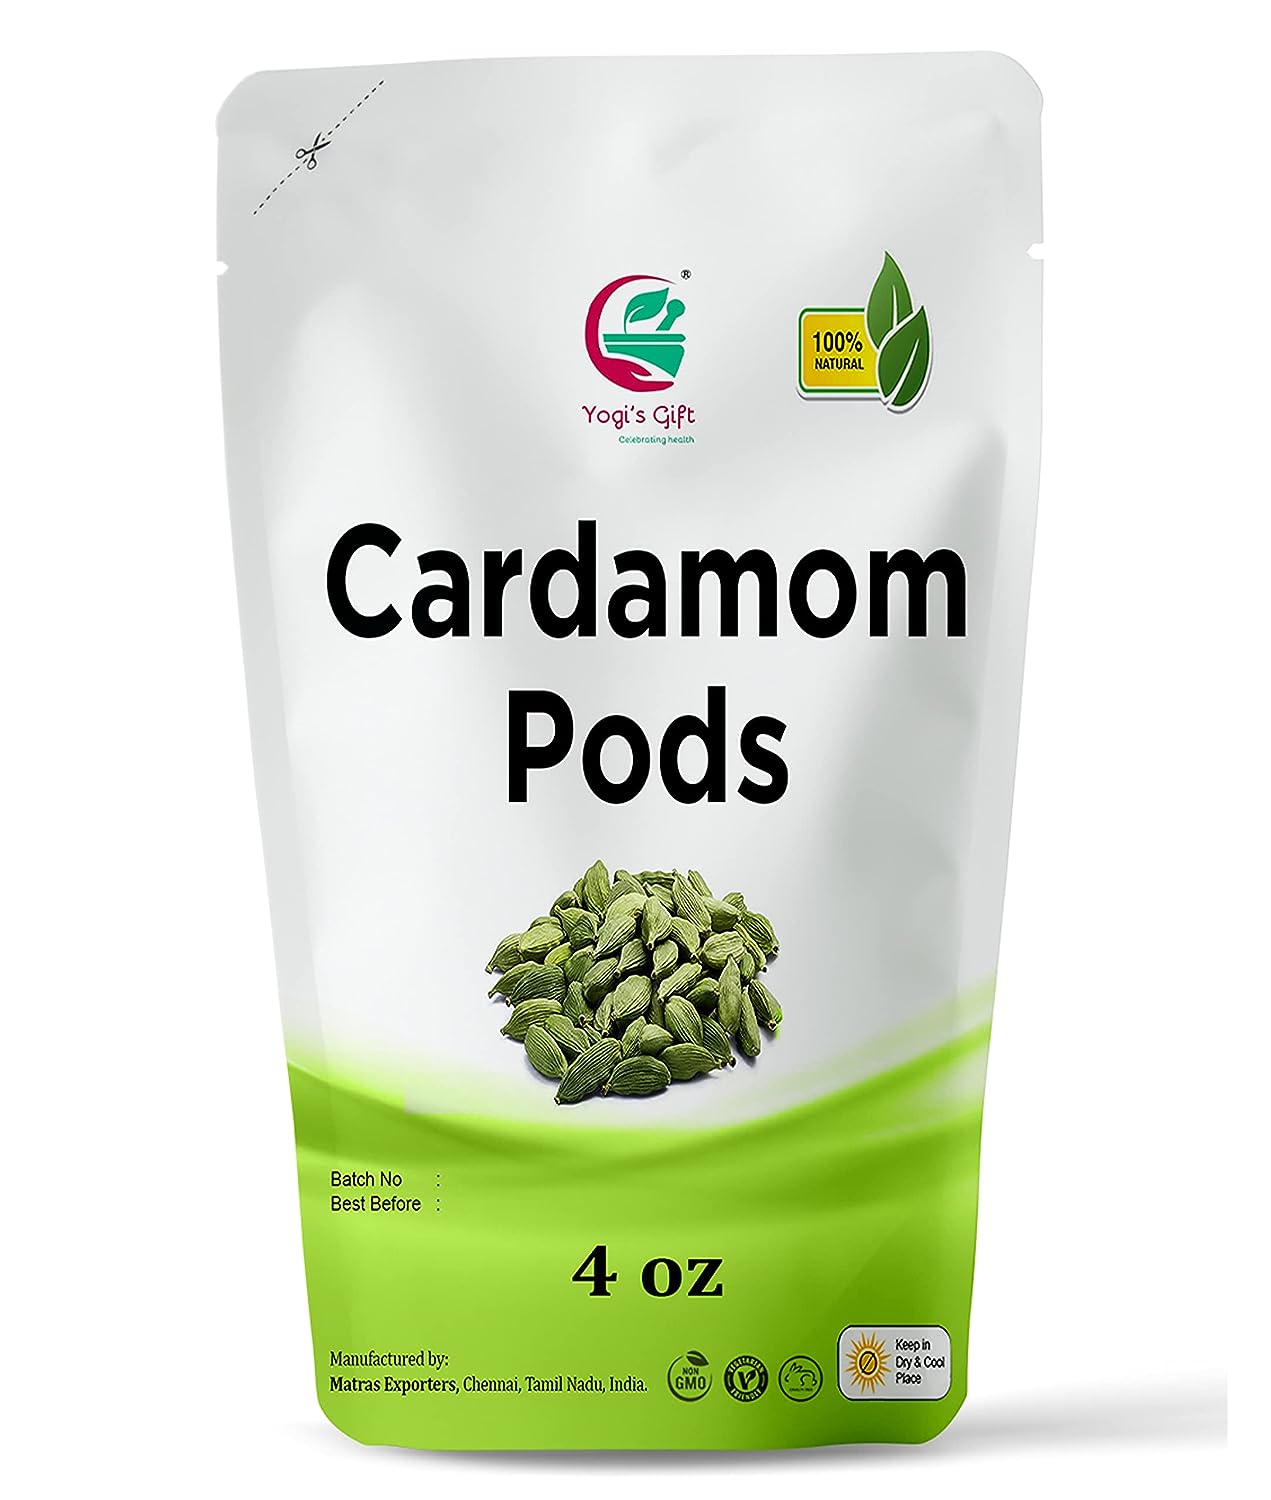 Green Cardamom Pods Whole | Cardamon 4 Oz | Flavourful Indian Spice | Fresh and Natural | Great for Coffee, Tea, Desserts and Baking | By Yogi's Gift®